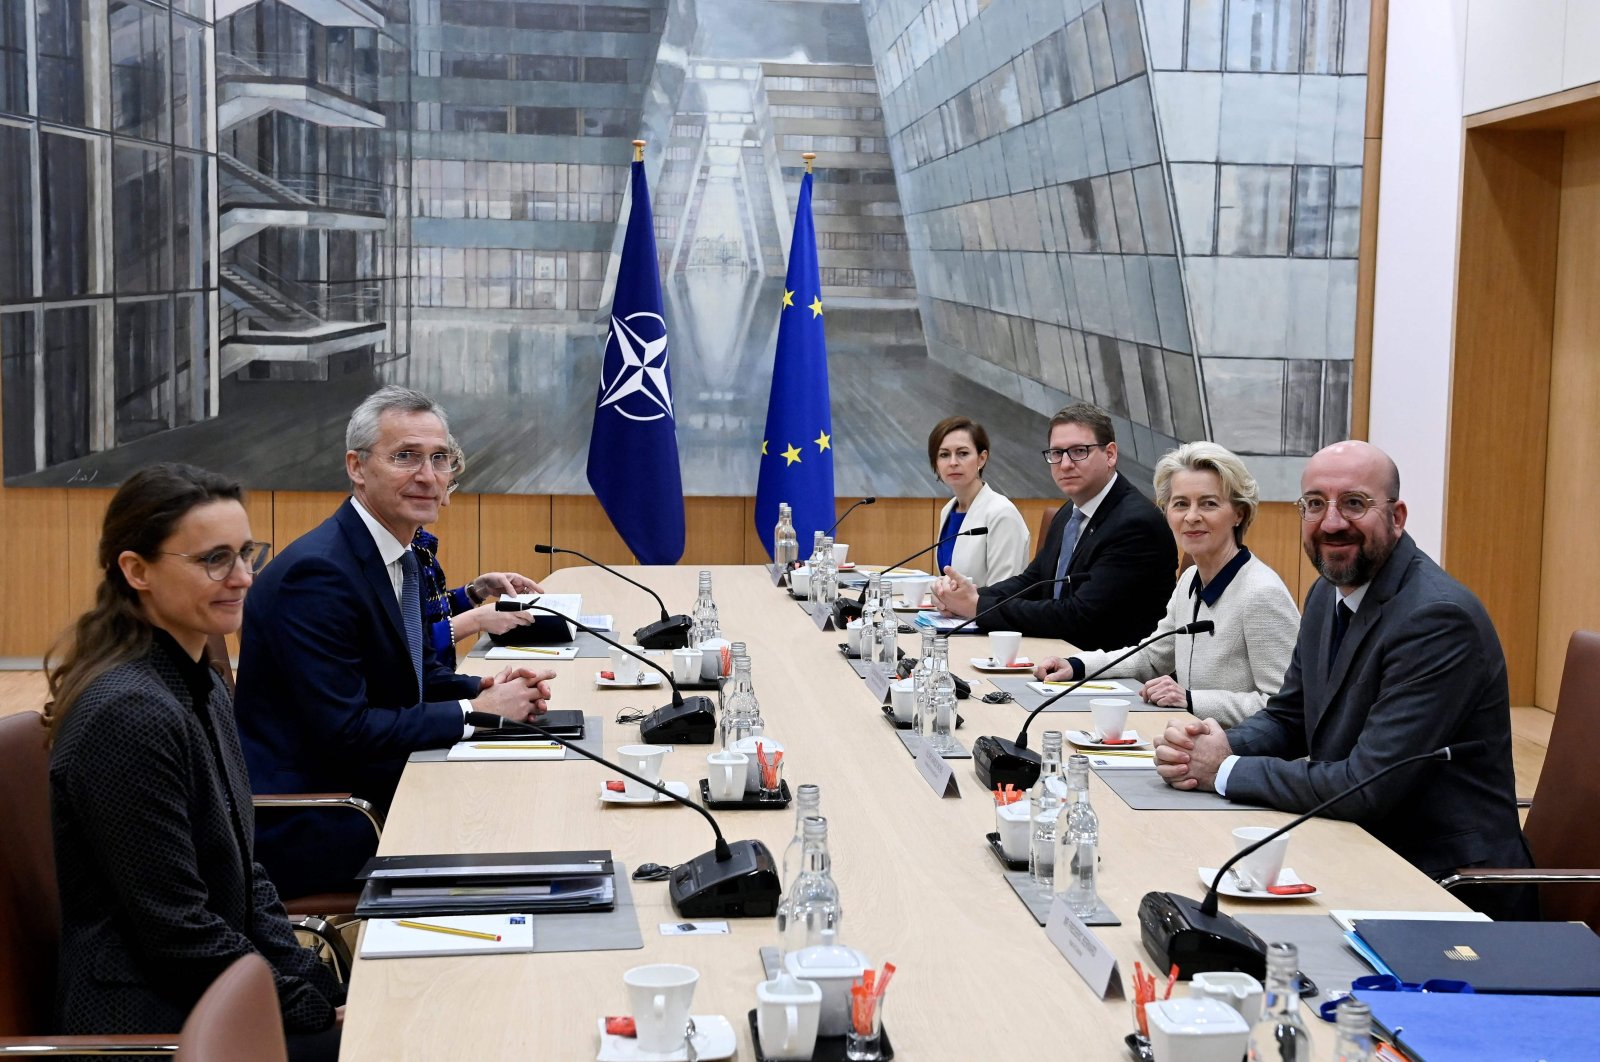 NATO&#039;s Secretary-General Jens Stoltenberg (2ndL), the president of the European Council Charles Michel (R) and President of the European Commission Ursula von der Leyen pose ahead of a meeting in Brussels on Jan. 10, 2023. (AFP Photo)